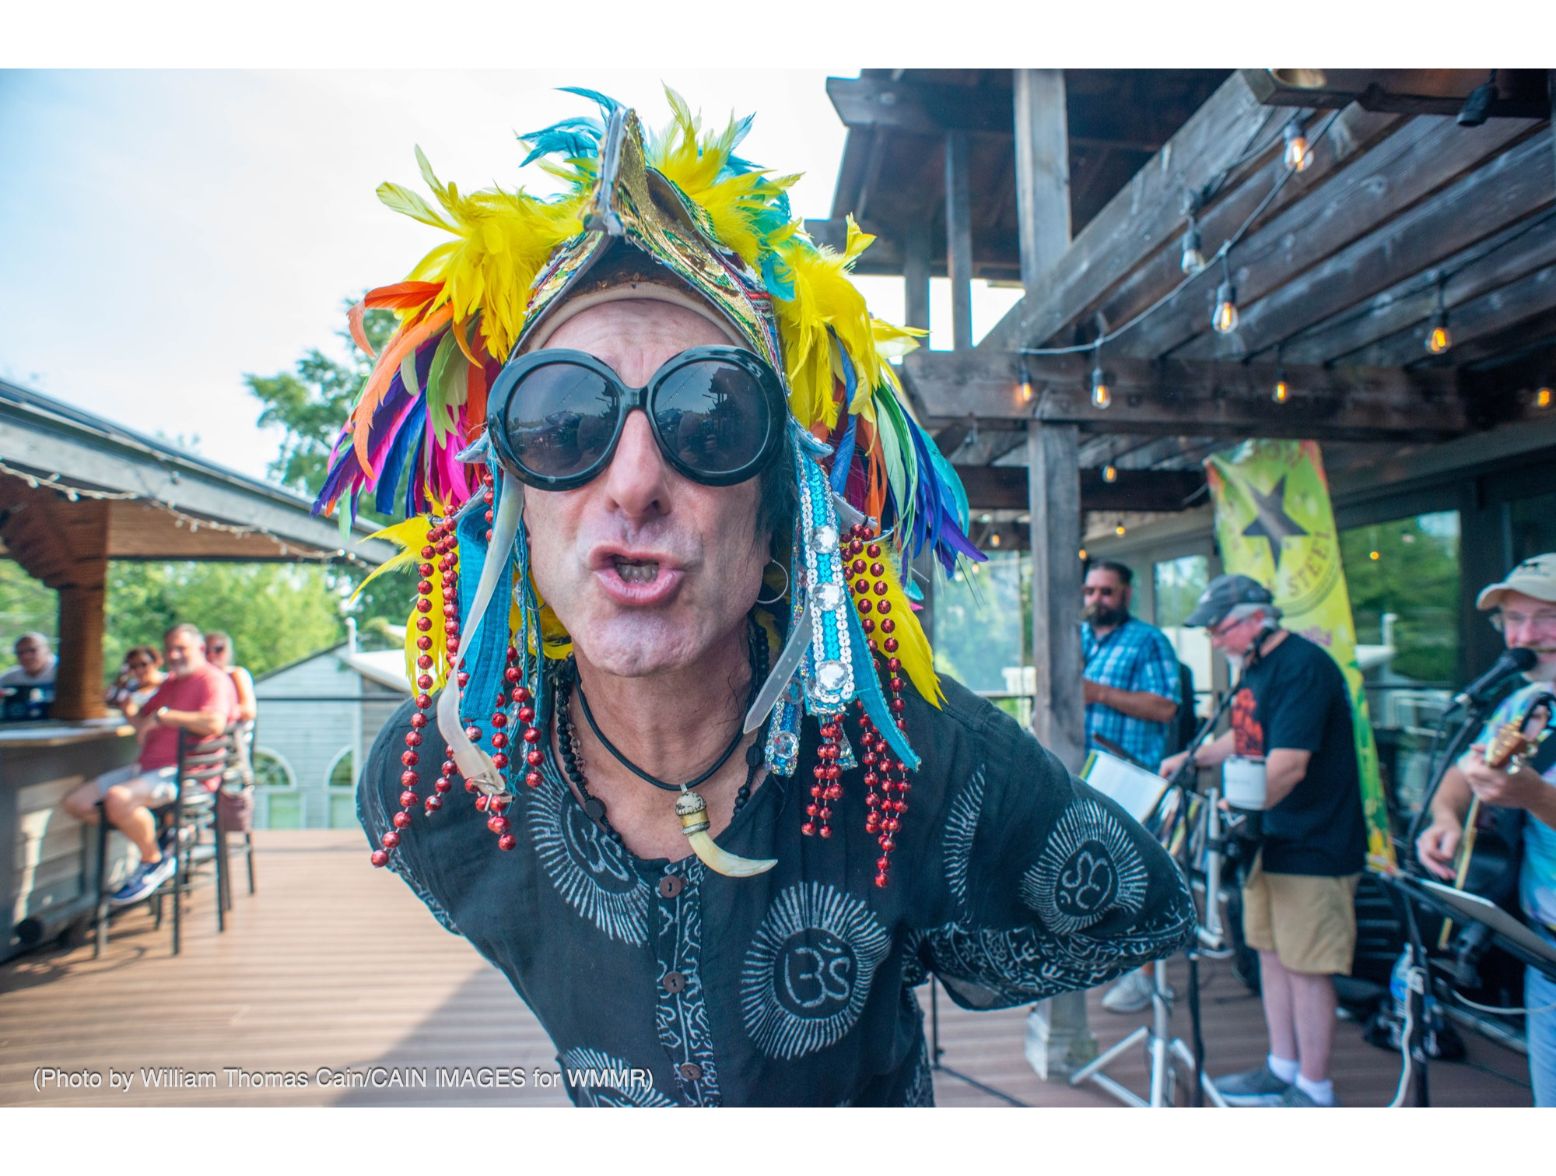 jacky bambam pulls a face during his guest appearance at dockside bensalem